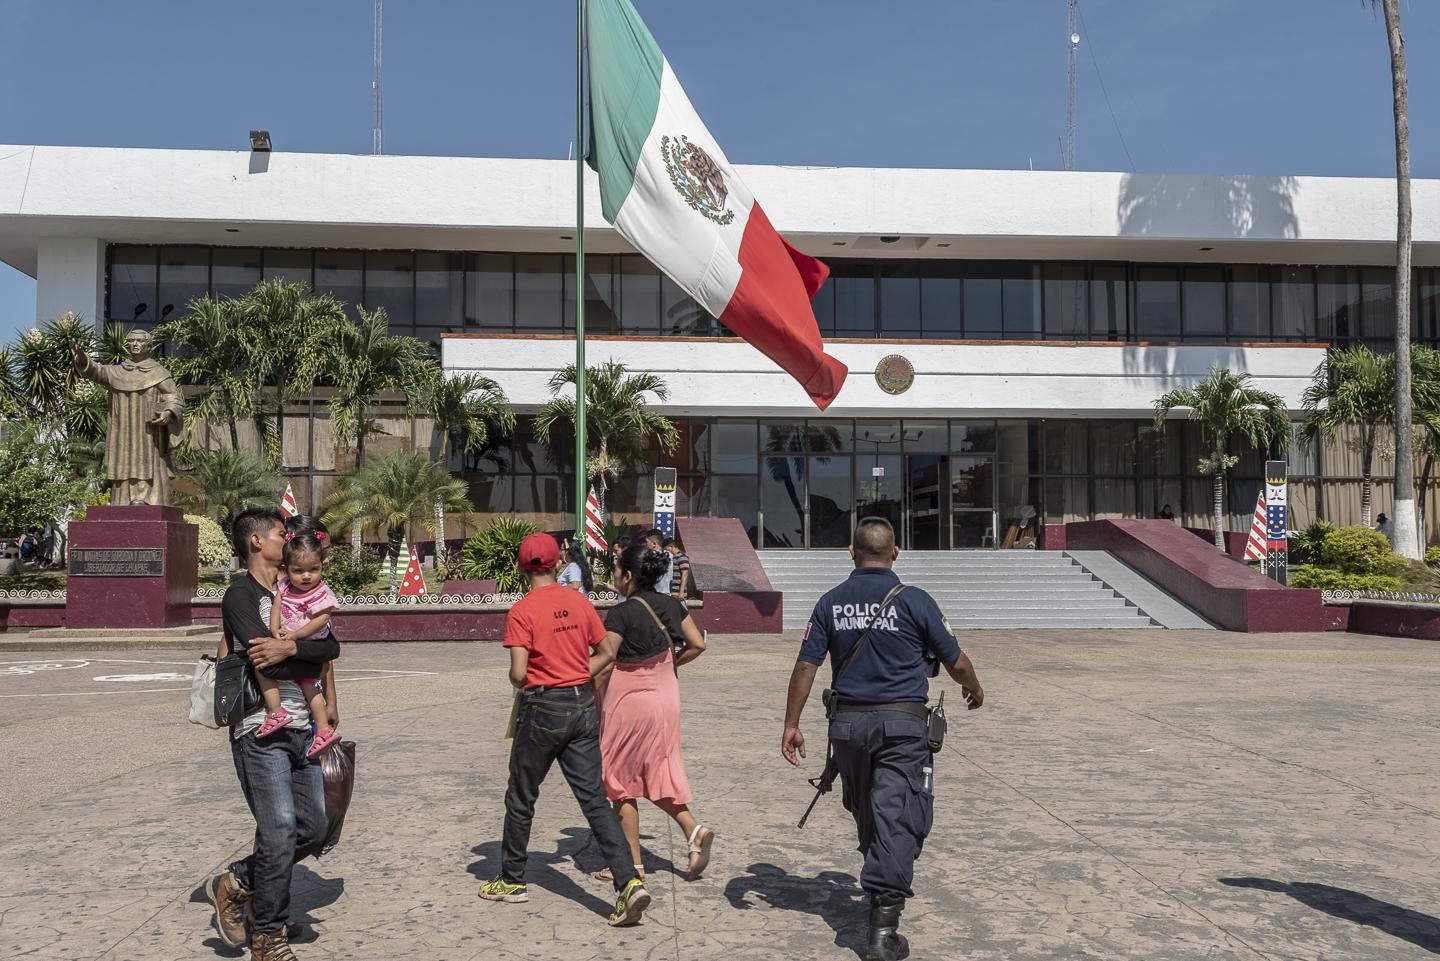 With the increase in the migrat...ula, Mexico, December 8th, 2019